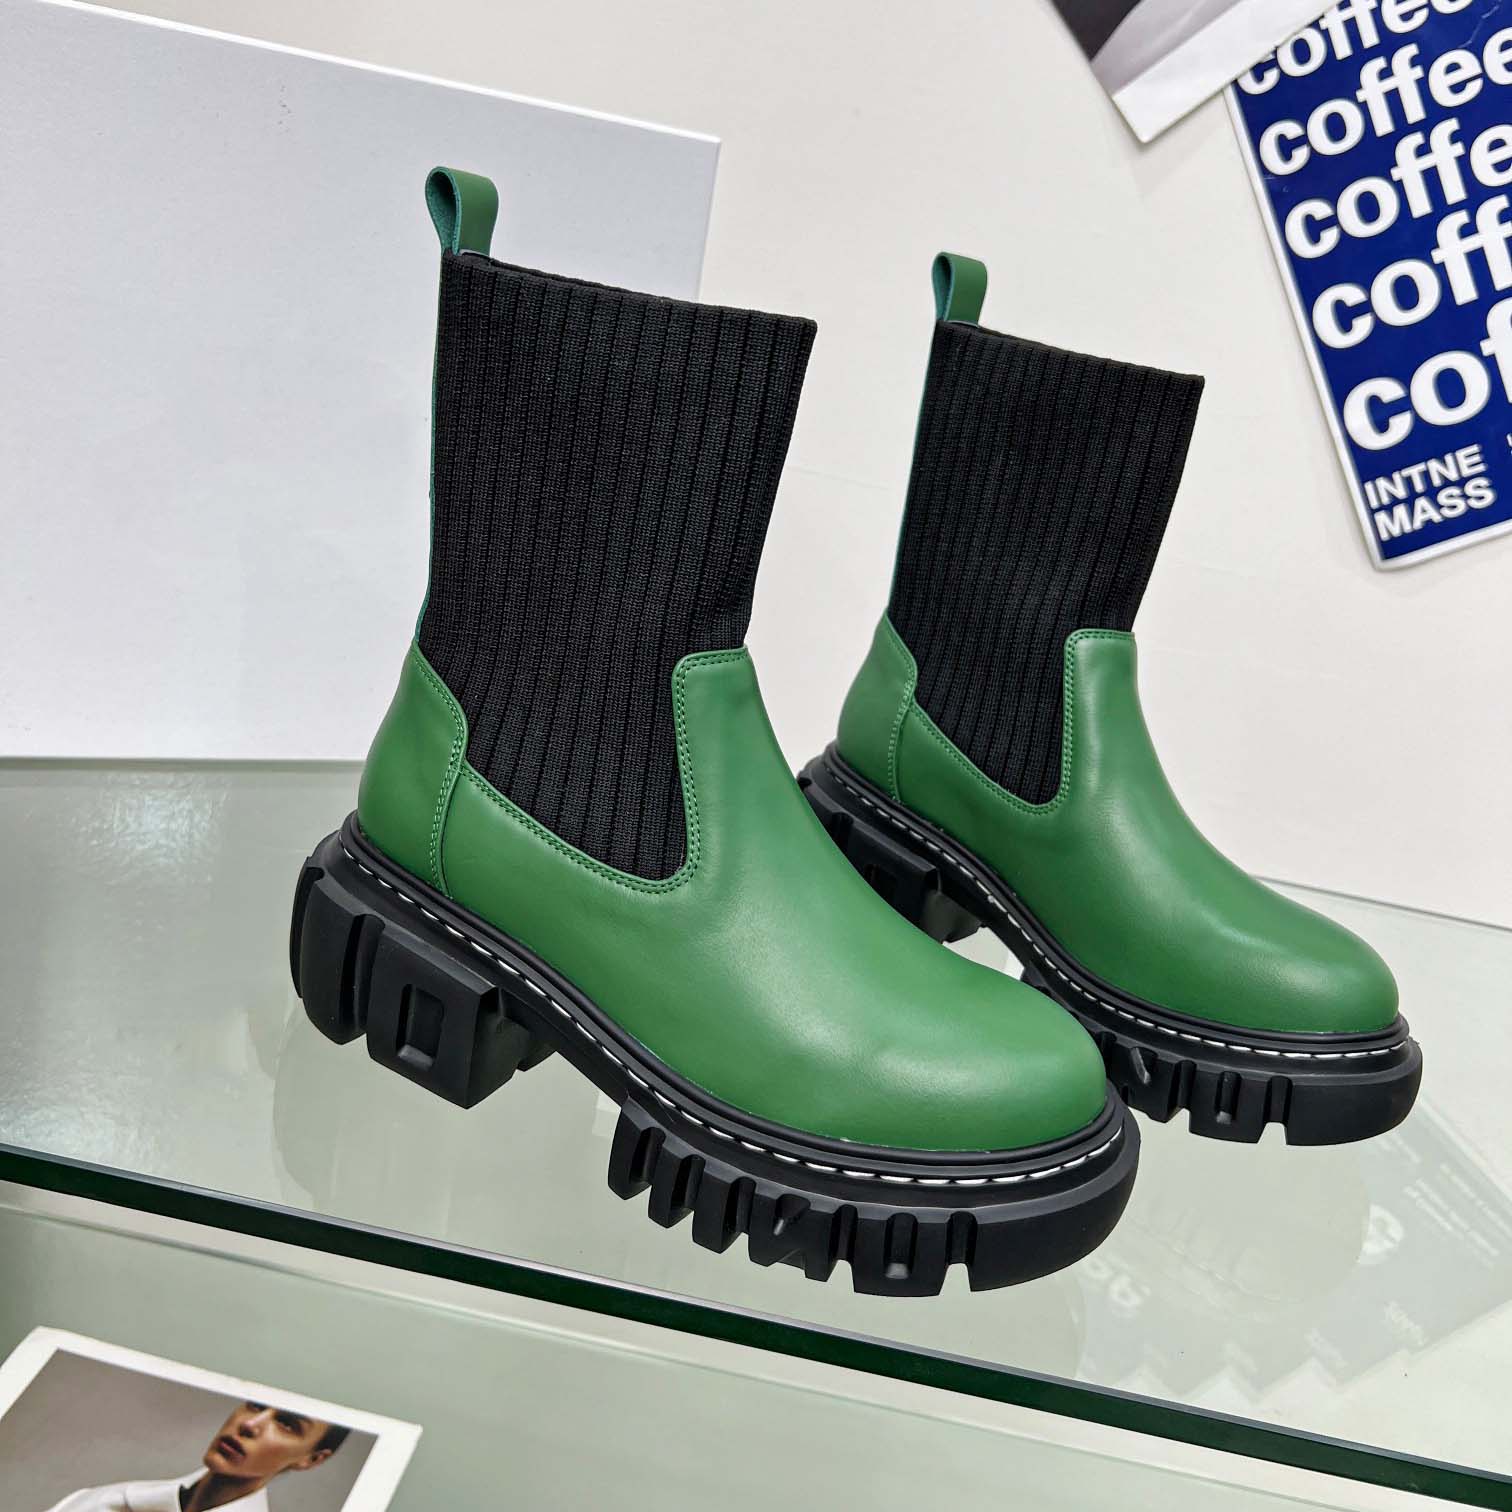 Boots Designer Boots Short Boots Middle Boots Flat Heel Luxury Temperament Black Green Leather High Quality Fashion Brand Women